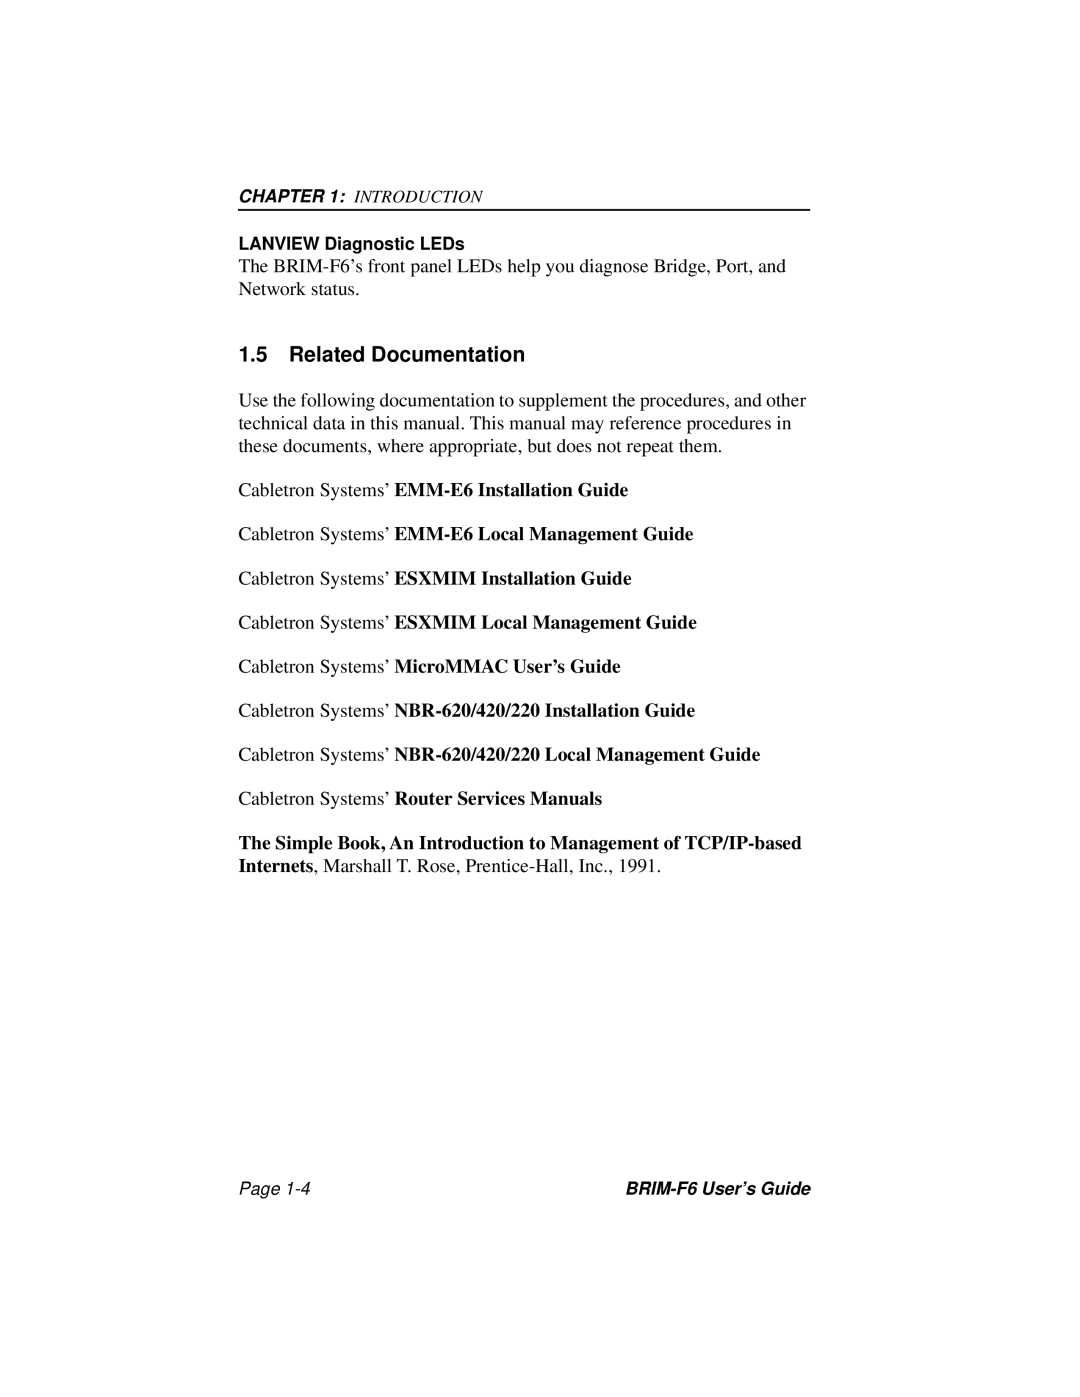 Cabletron Systems BRIM-F6 manual Related Documentation 